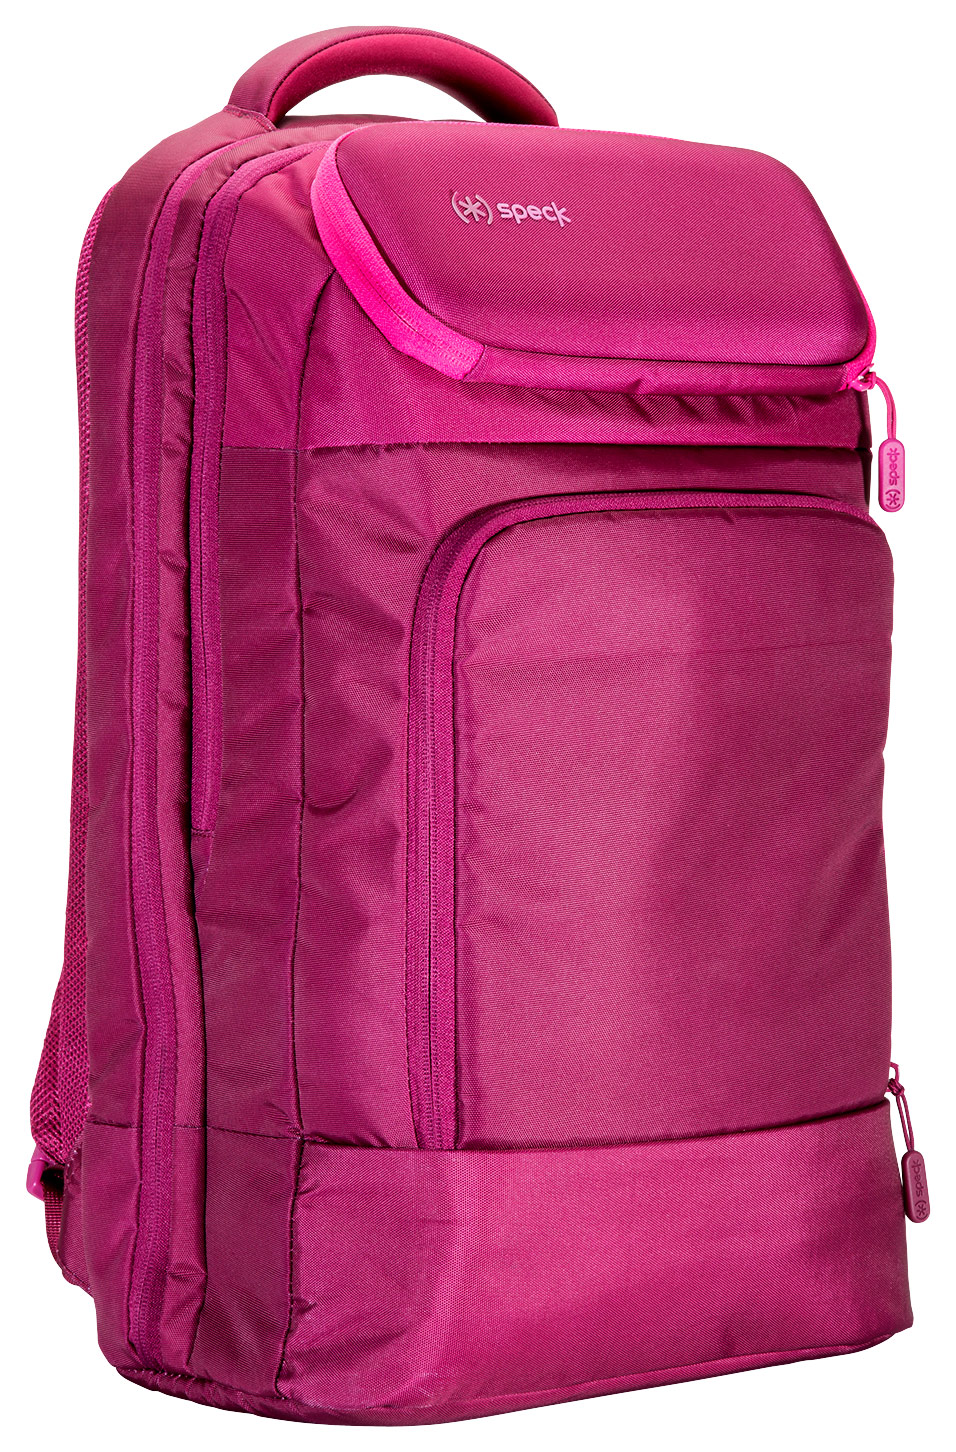 0848709022929 - SPECK PRODUCTS MIGHTYPACK PLUS CHECKPOINT-FRIENDLY BACKPACK FOR LAPTOPS AND TABLETS UP TO 15 INCHES, ZINFANDEL PINK/POMEGRANATE PINK/POLAR GREY/GLITTER PINK, SPK-A4050